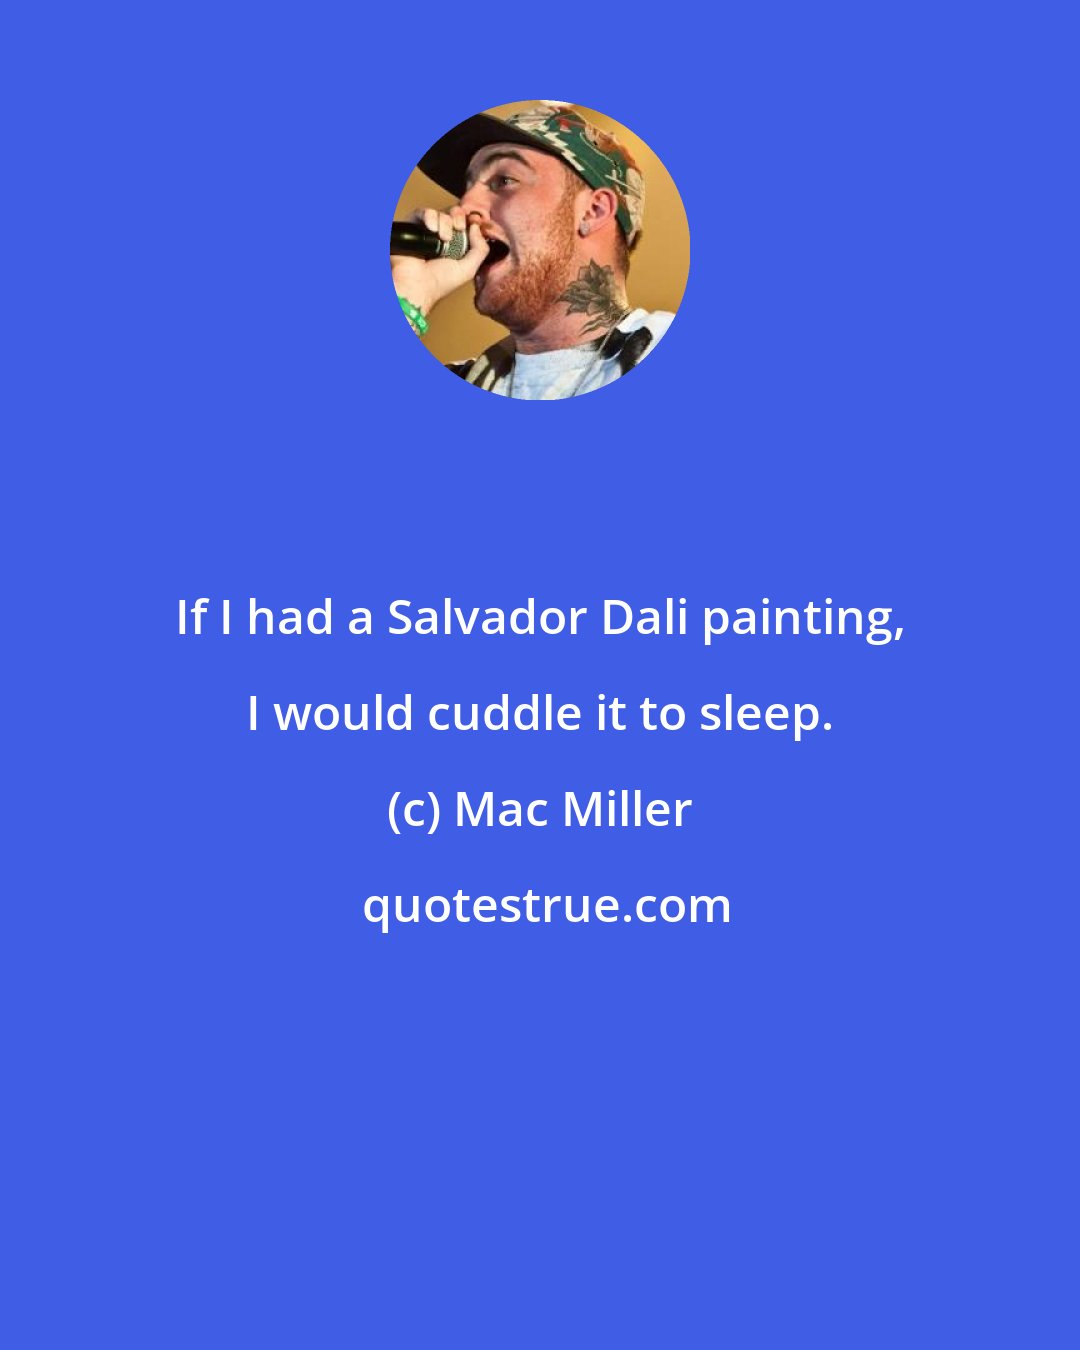 Mac Miller: If I had a Salvador Dali painting, I would cuddle it to sleep.